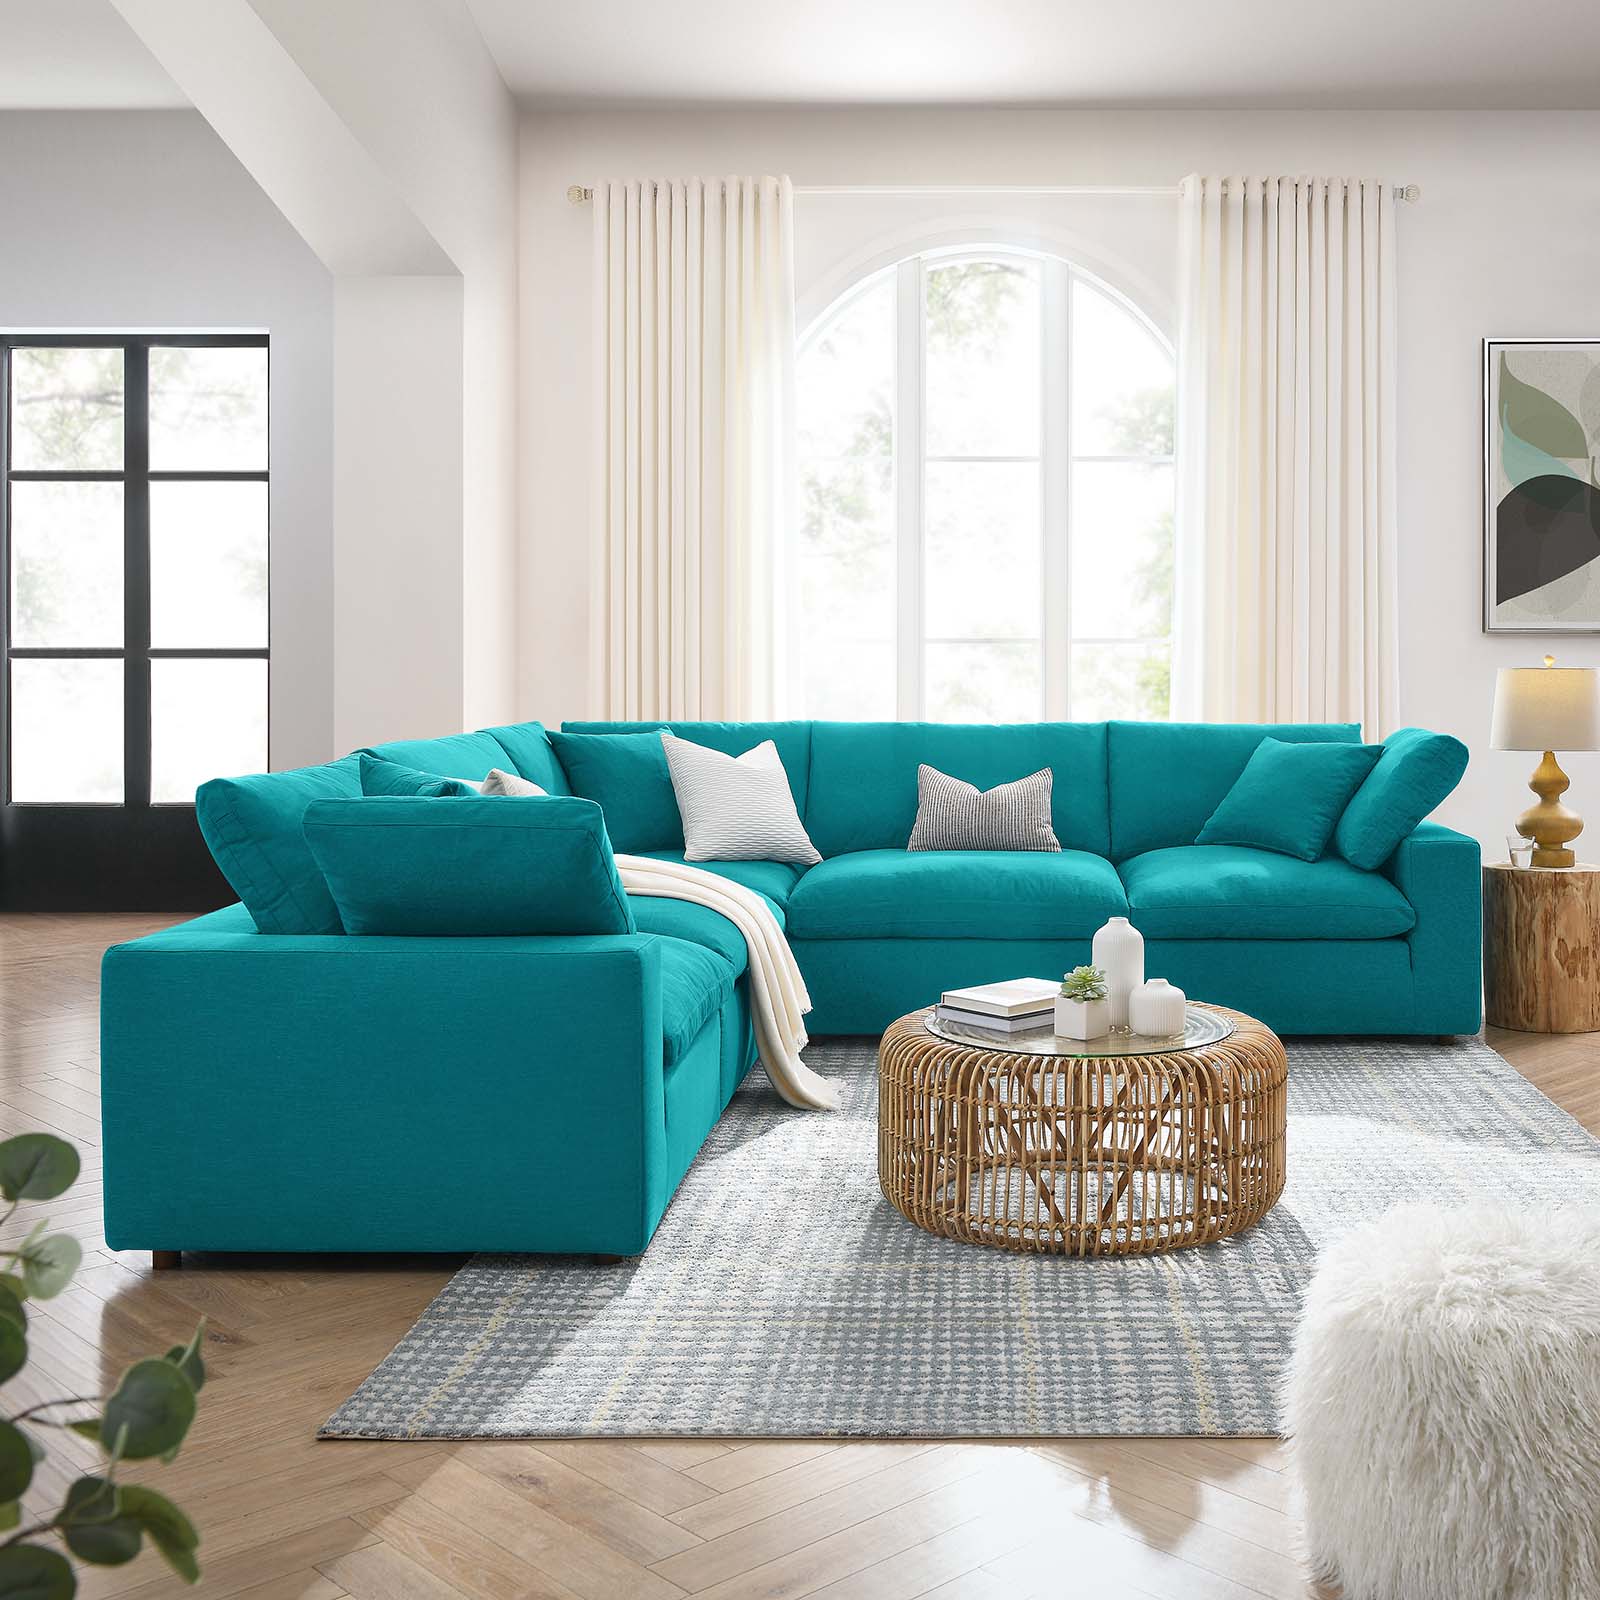 Modway Sectional Sofas - Commix Down Filled Overstuffed 5 Pcs Sectional Sofa Set Teal